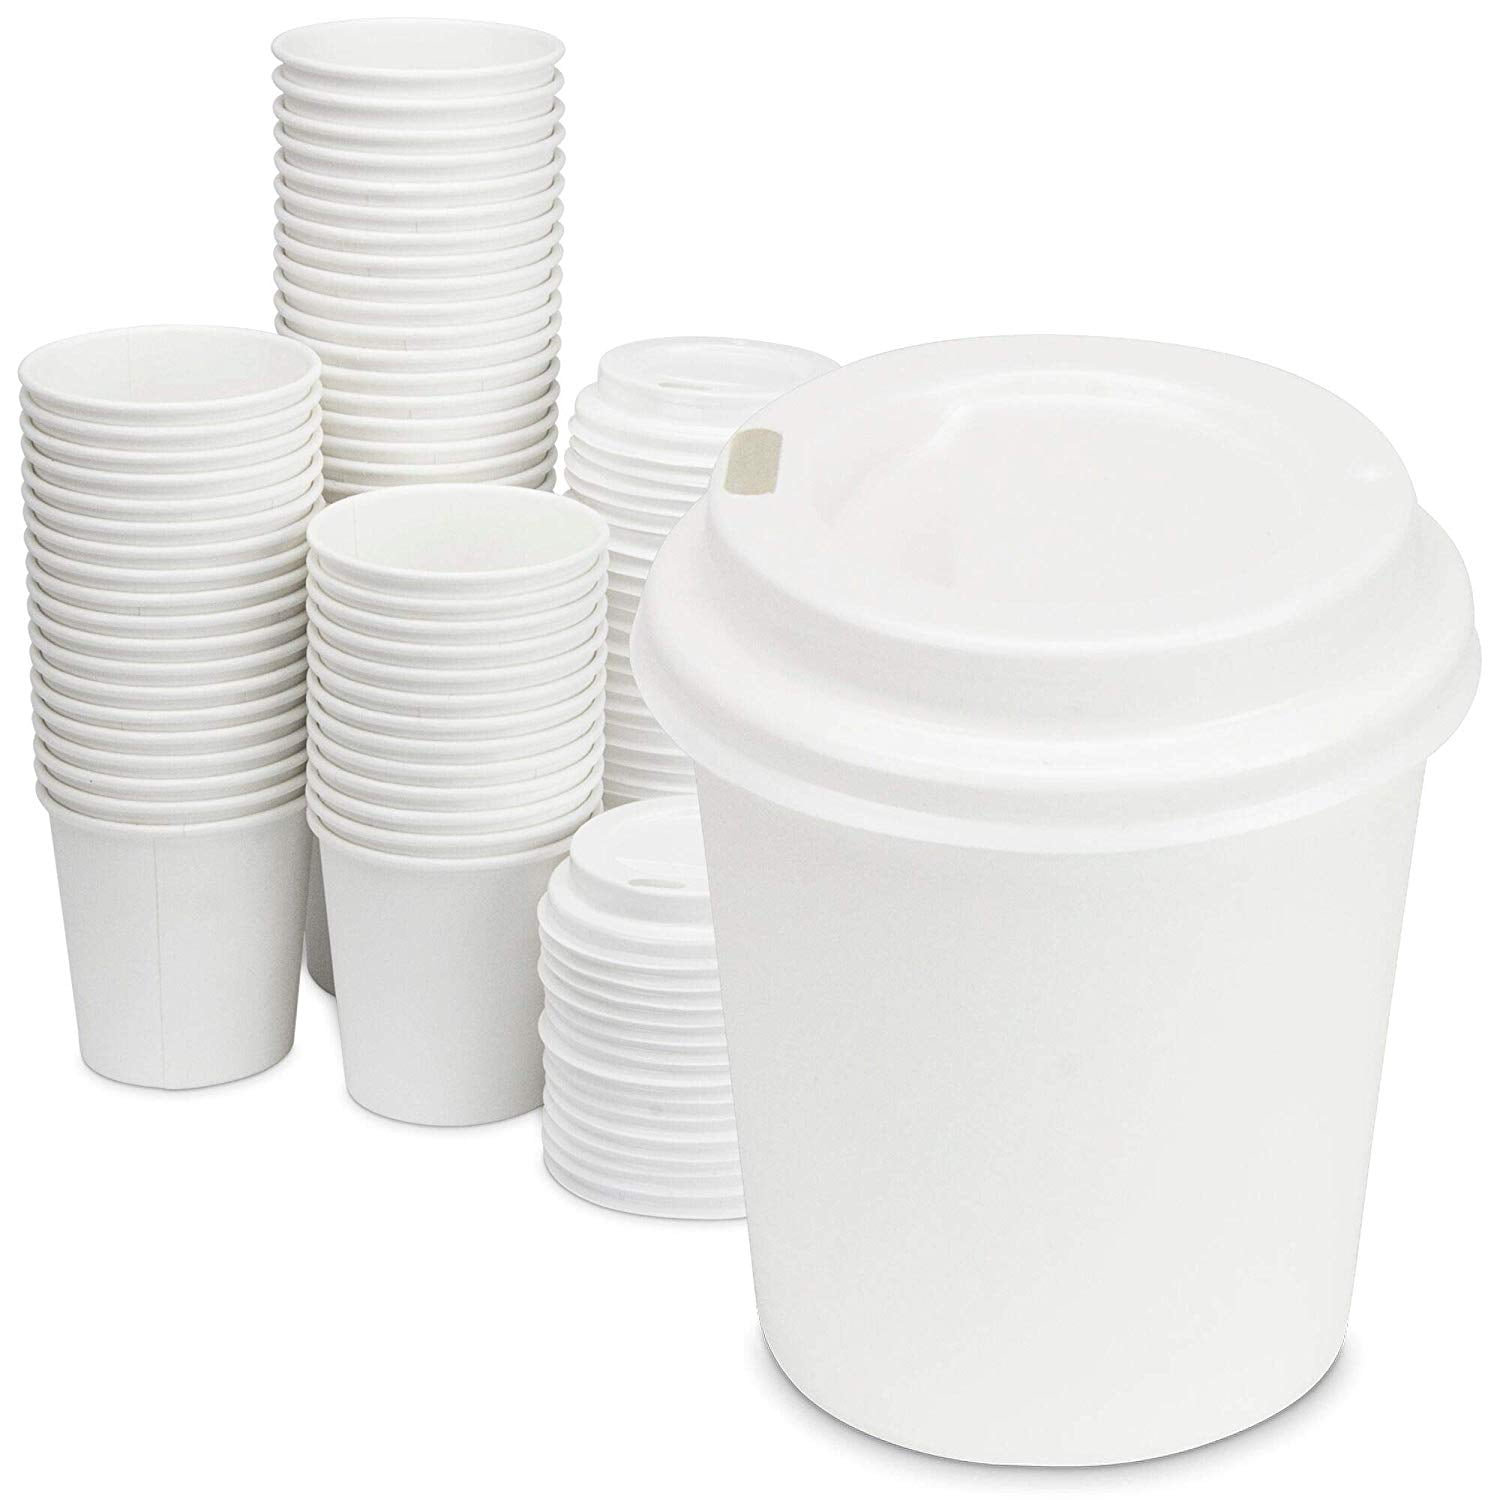 Pack of 100x Disposable Reusable Tea Coffee Hot Drink Birthdays Party Mug Cups